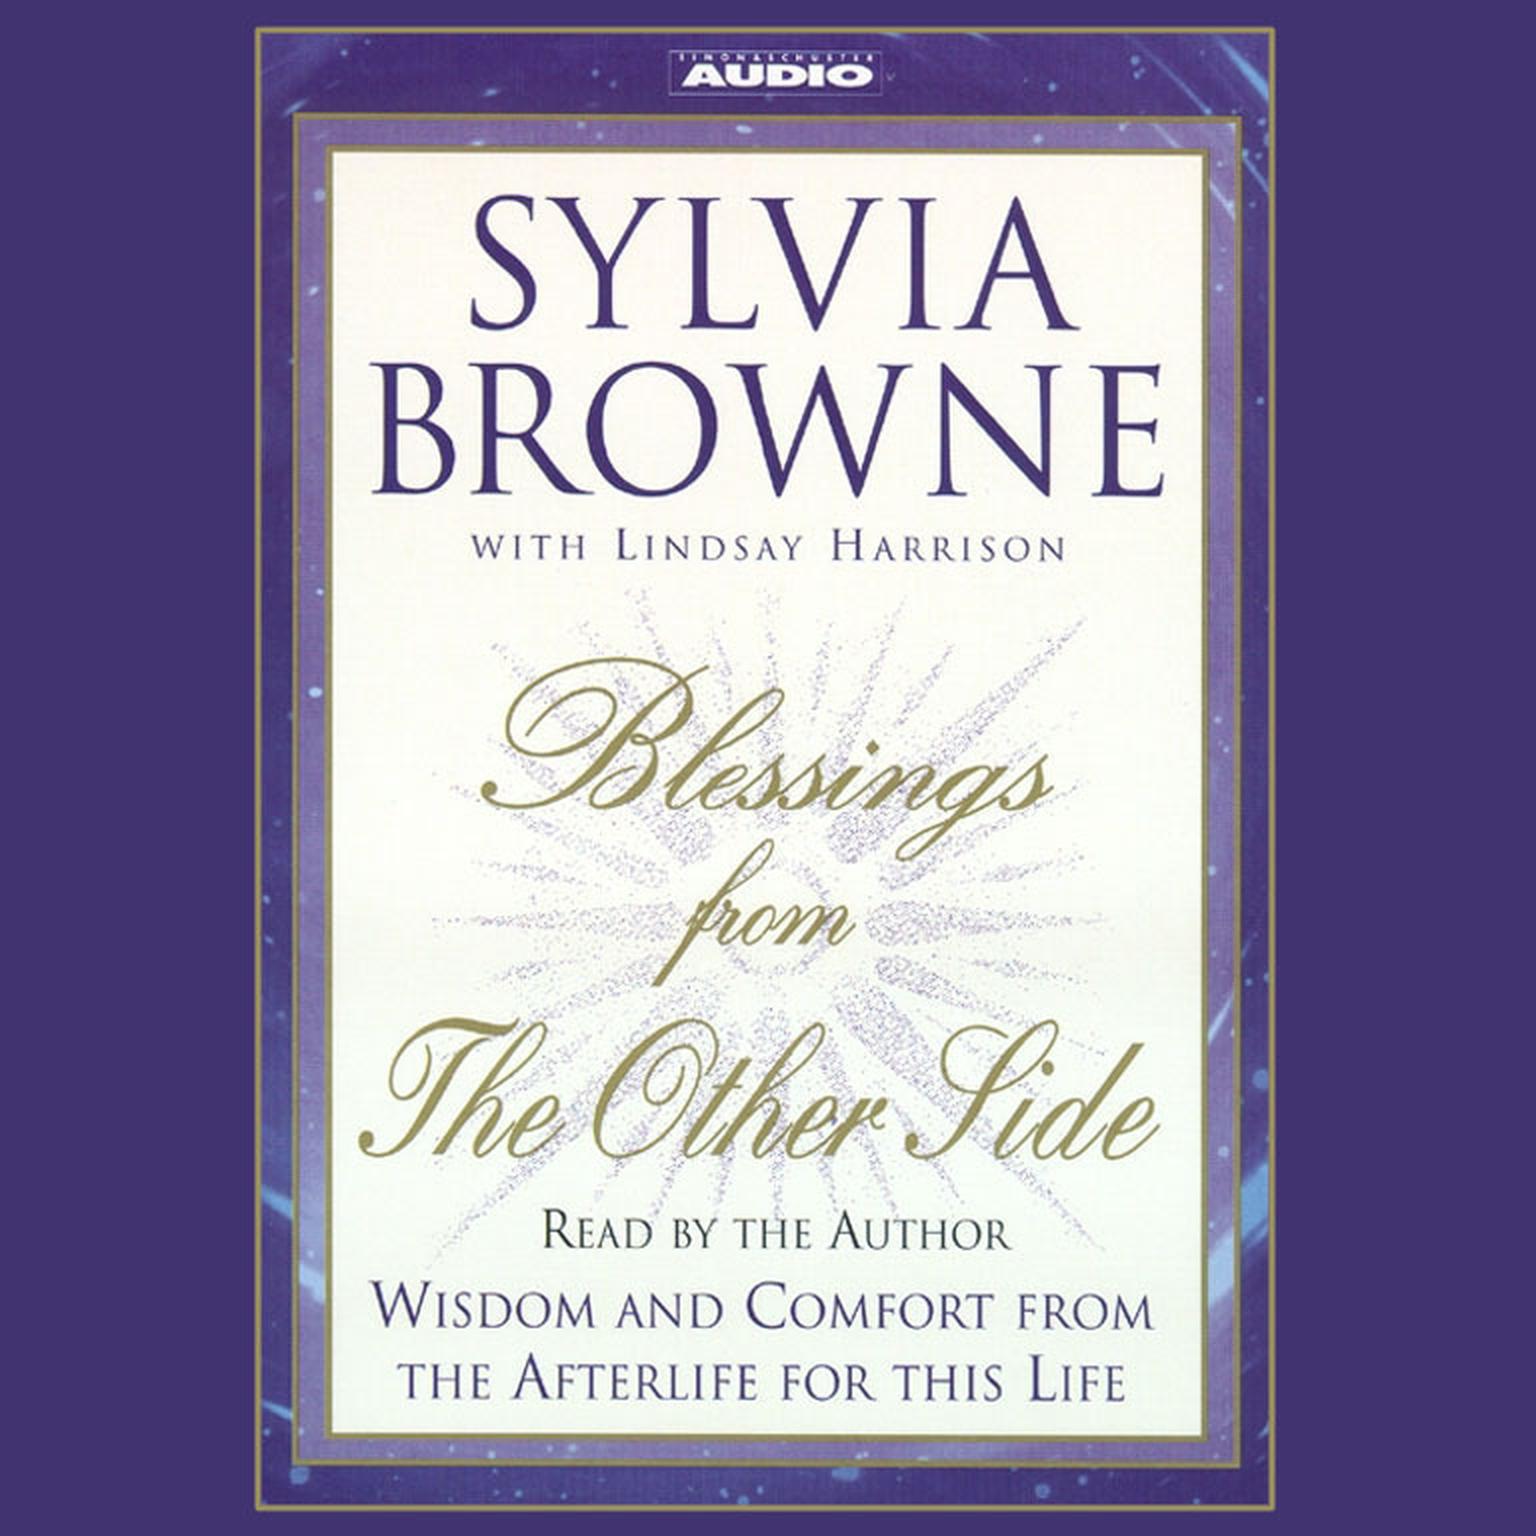 Blessings from the Other Side (Abridged): Wisdom and Comfort from the Afterlife for This Life Audiobook, by Sylvia Browne